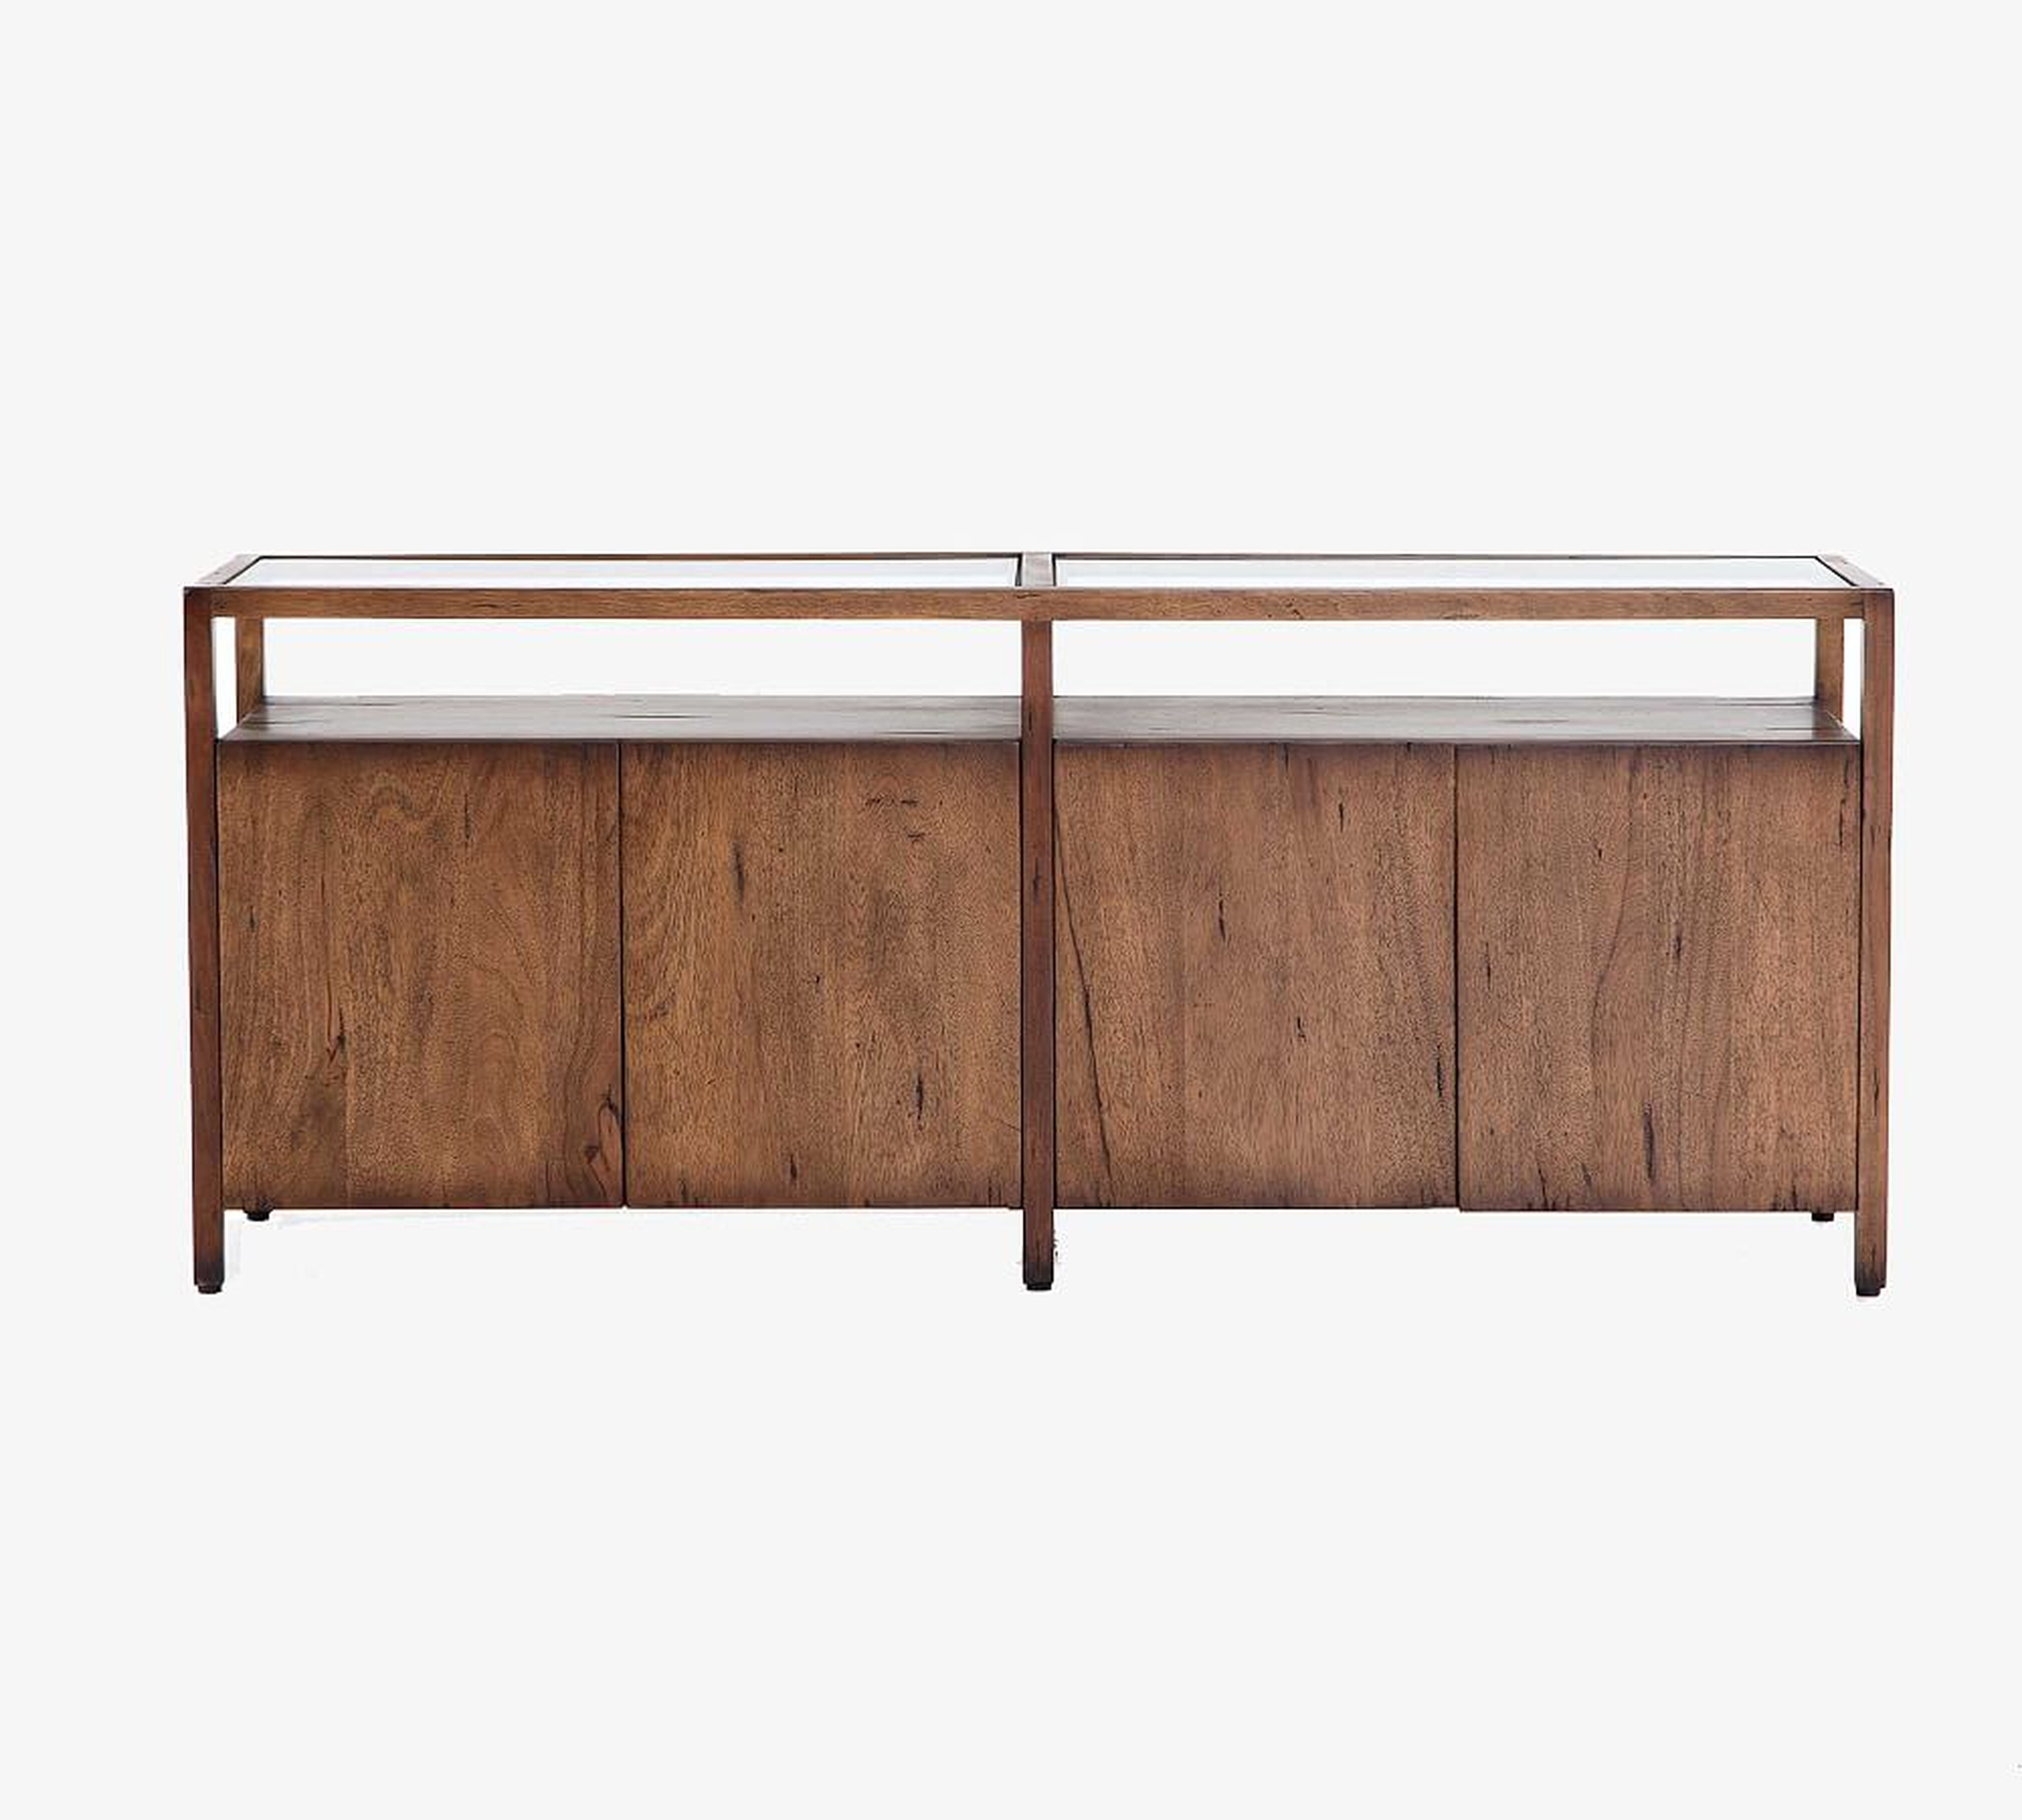 Parkview Reclaimed Wood Media Console, Fruitwood, 70" - Pottery Barn